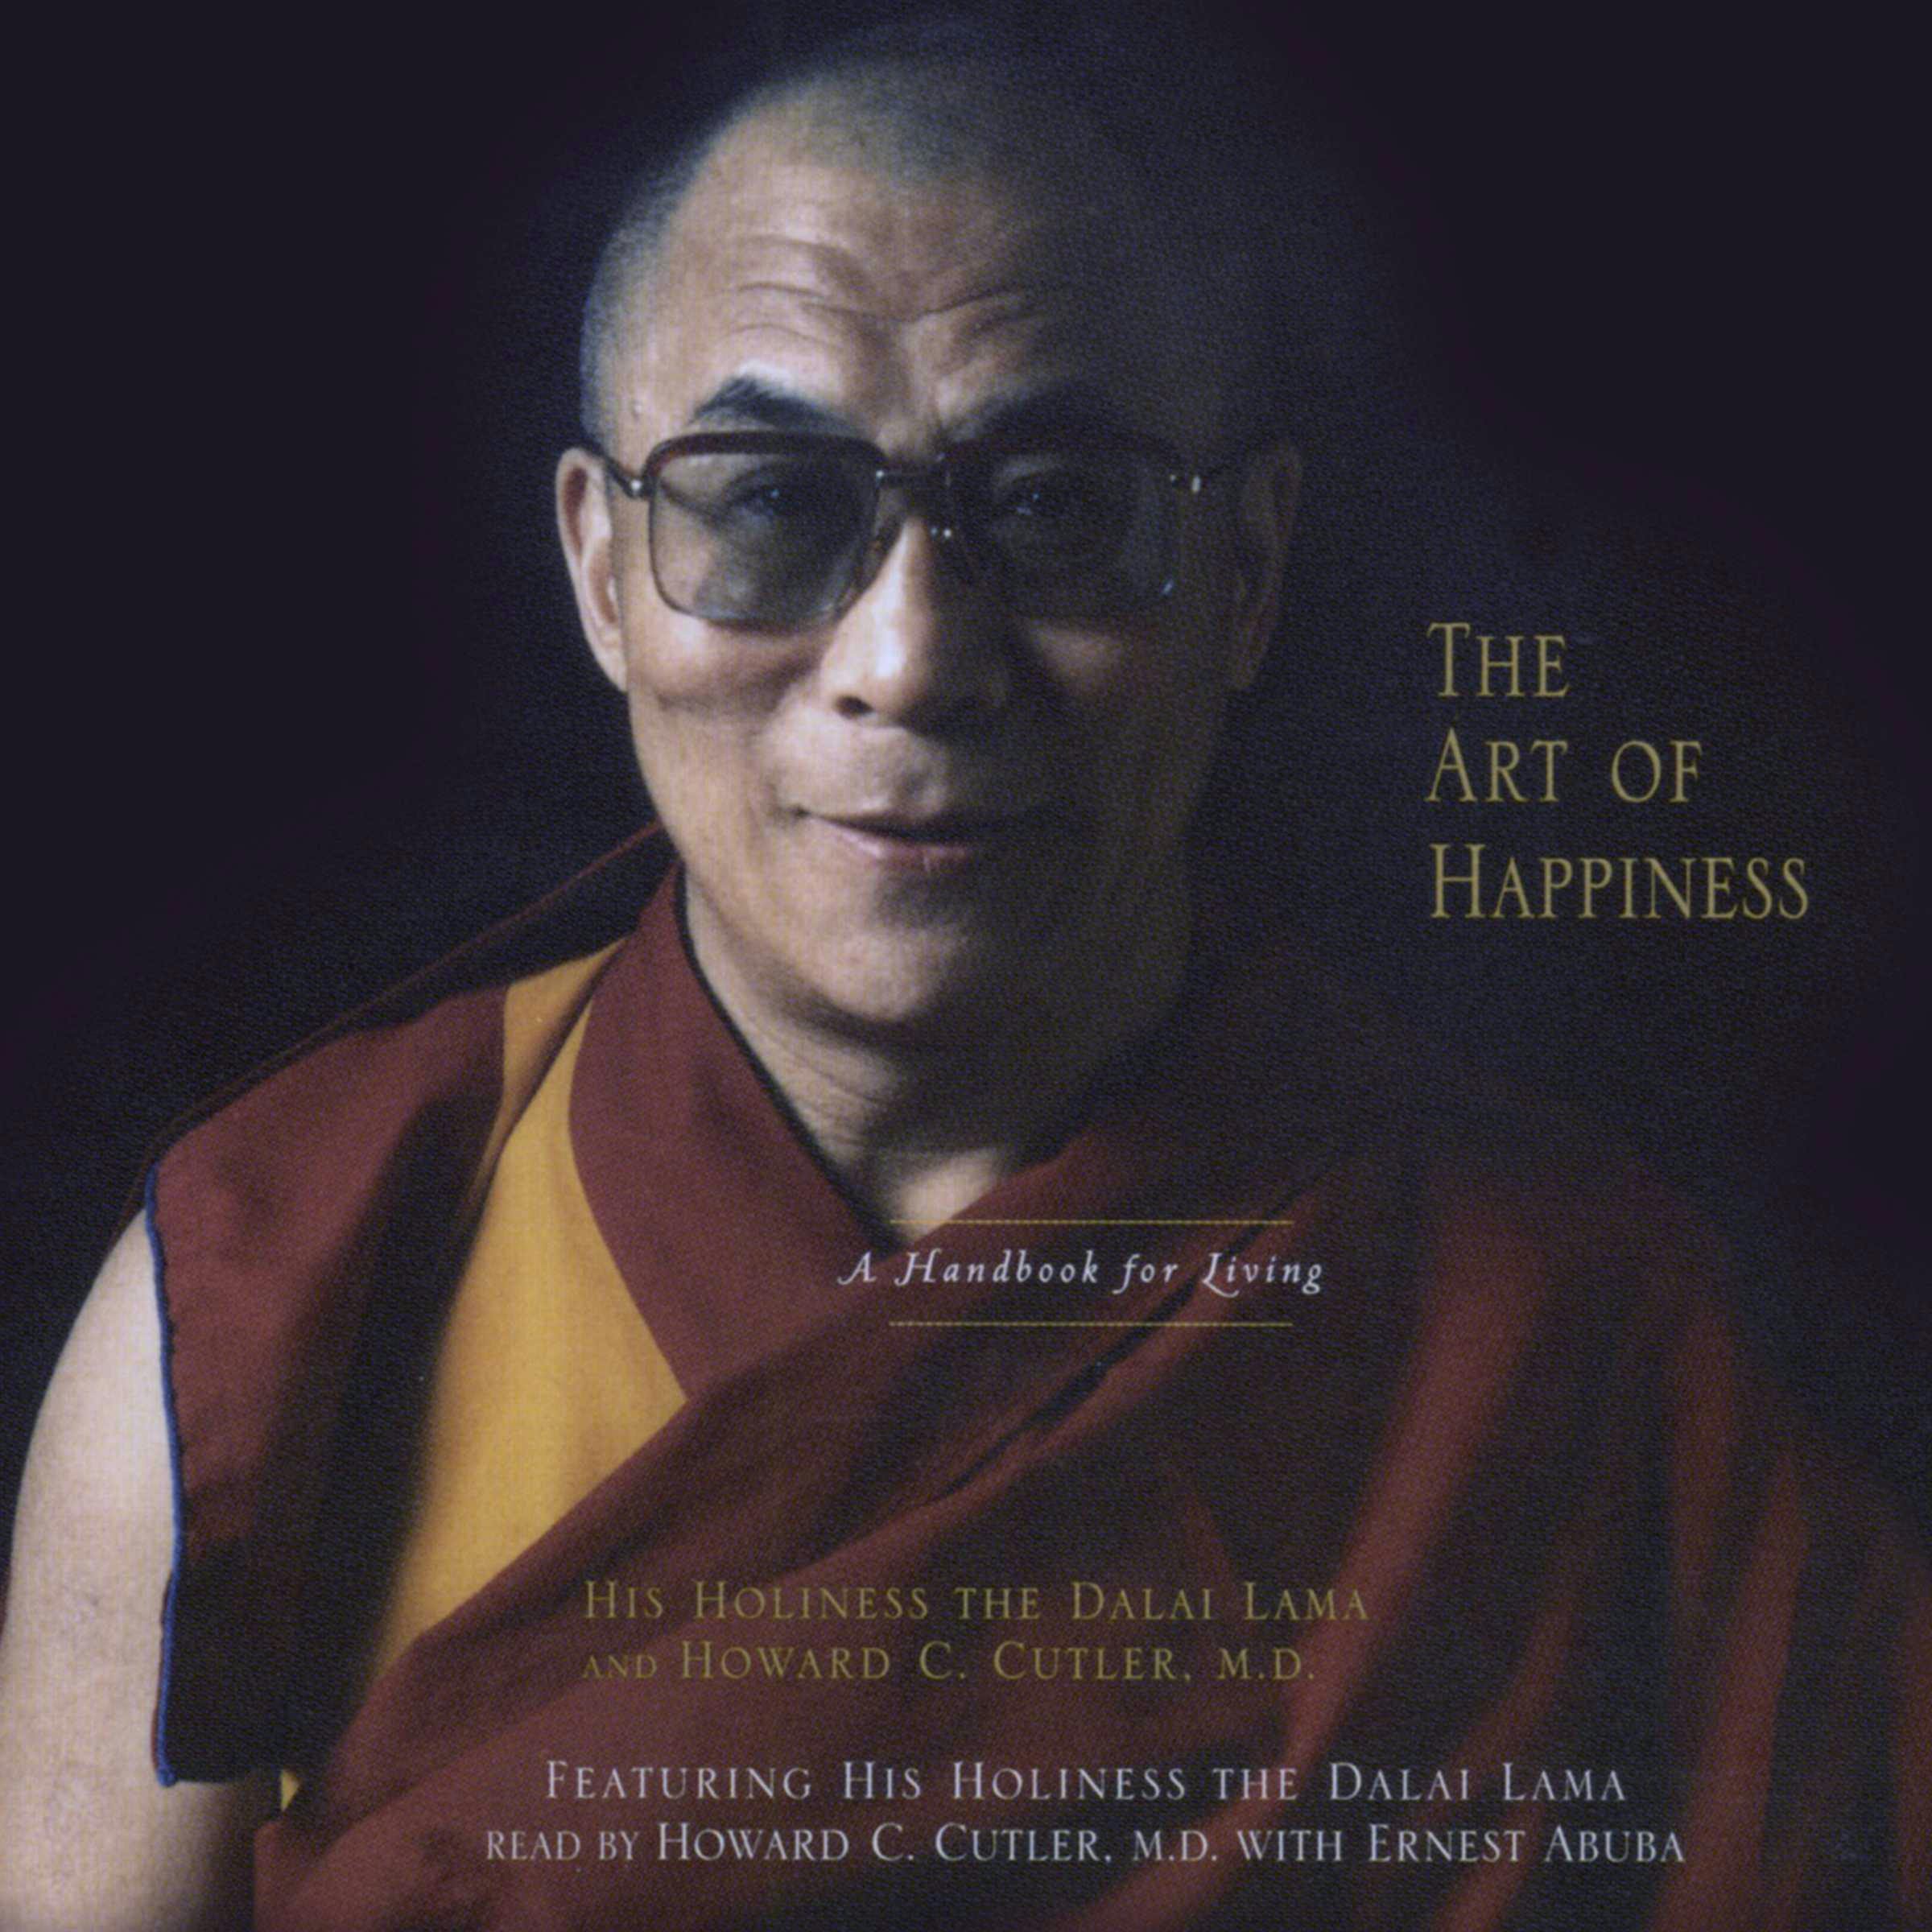 The Art of Happiness: A Handbook for Living - His Holiness the Dalai Lama, Howard C. Cutler